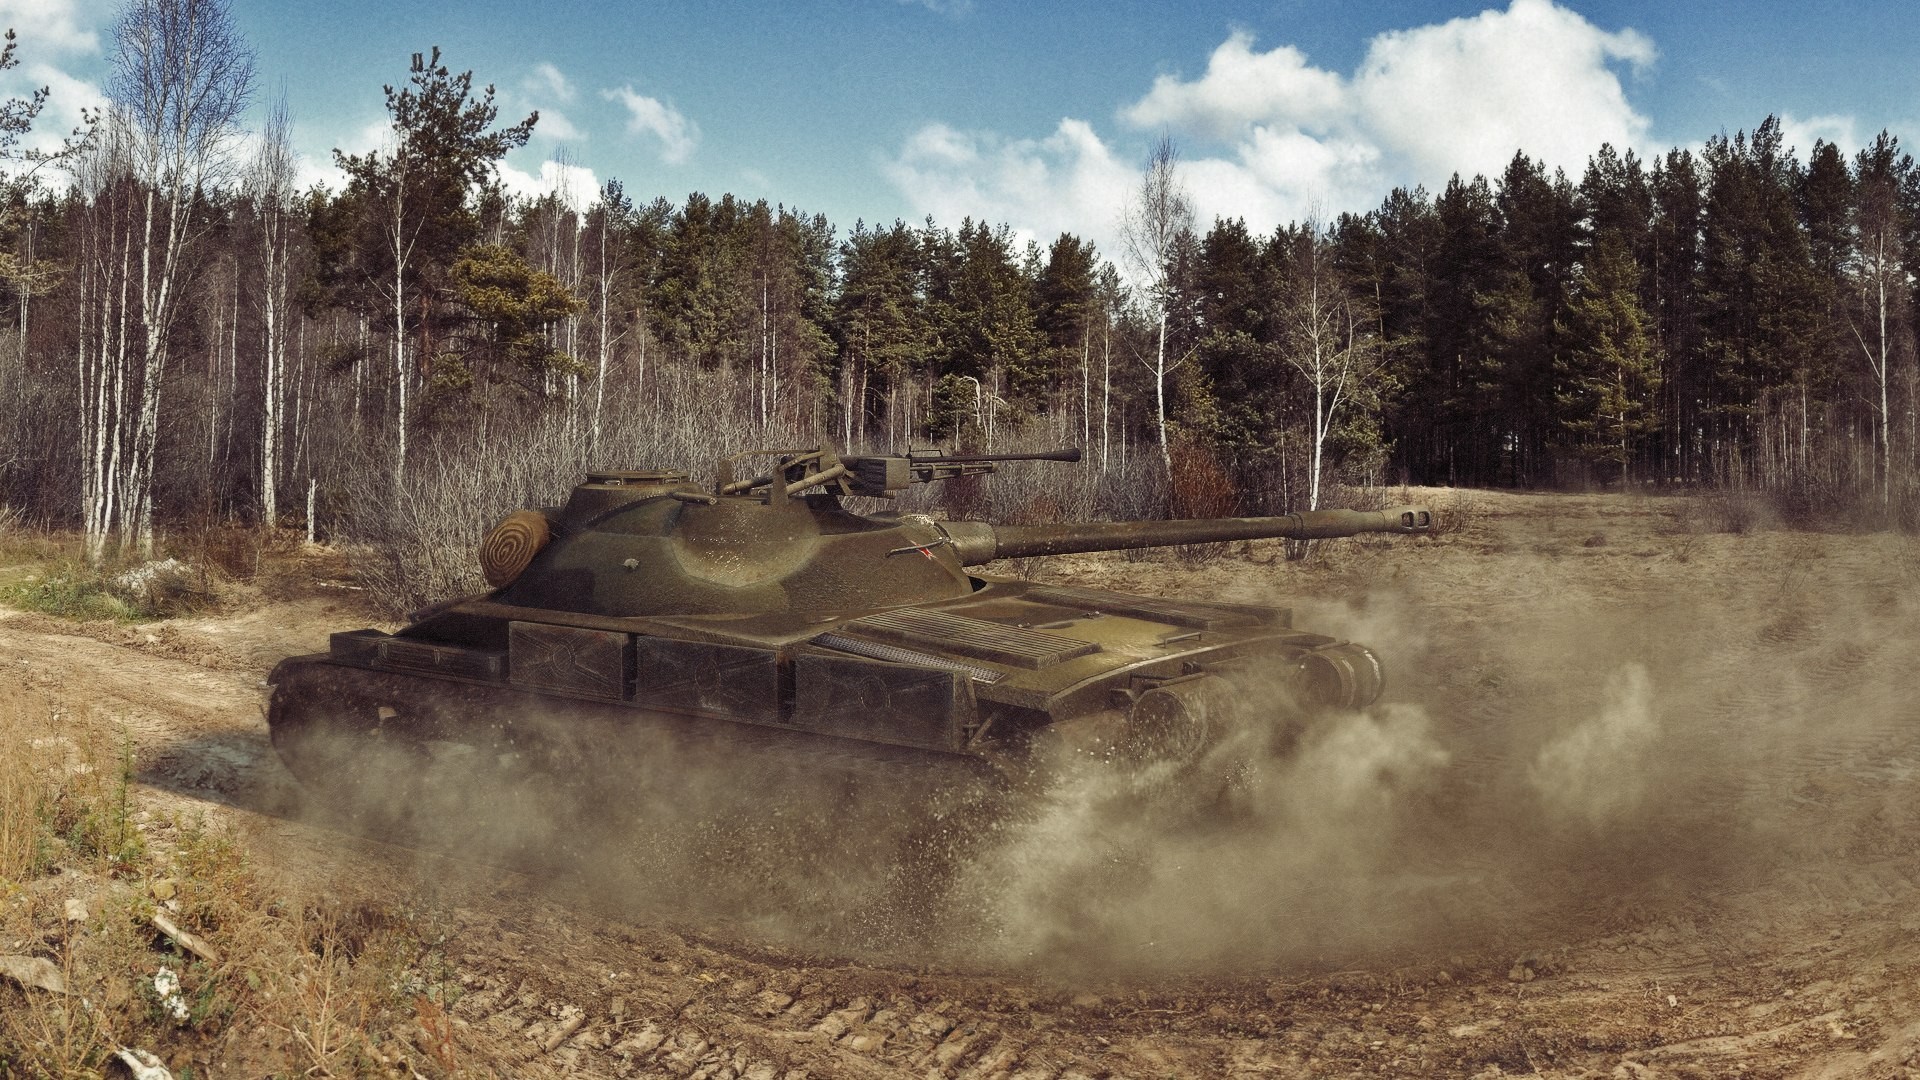 General 1920x1080 World of Tanks tank CGI wargaming nature forest